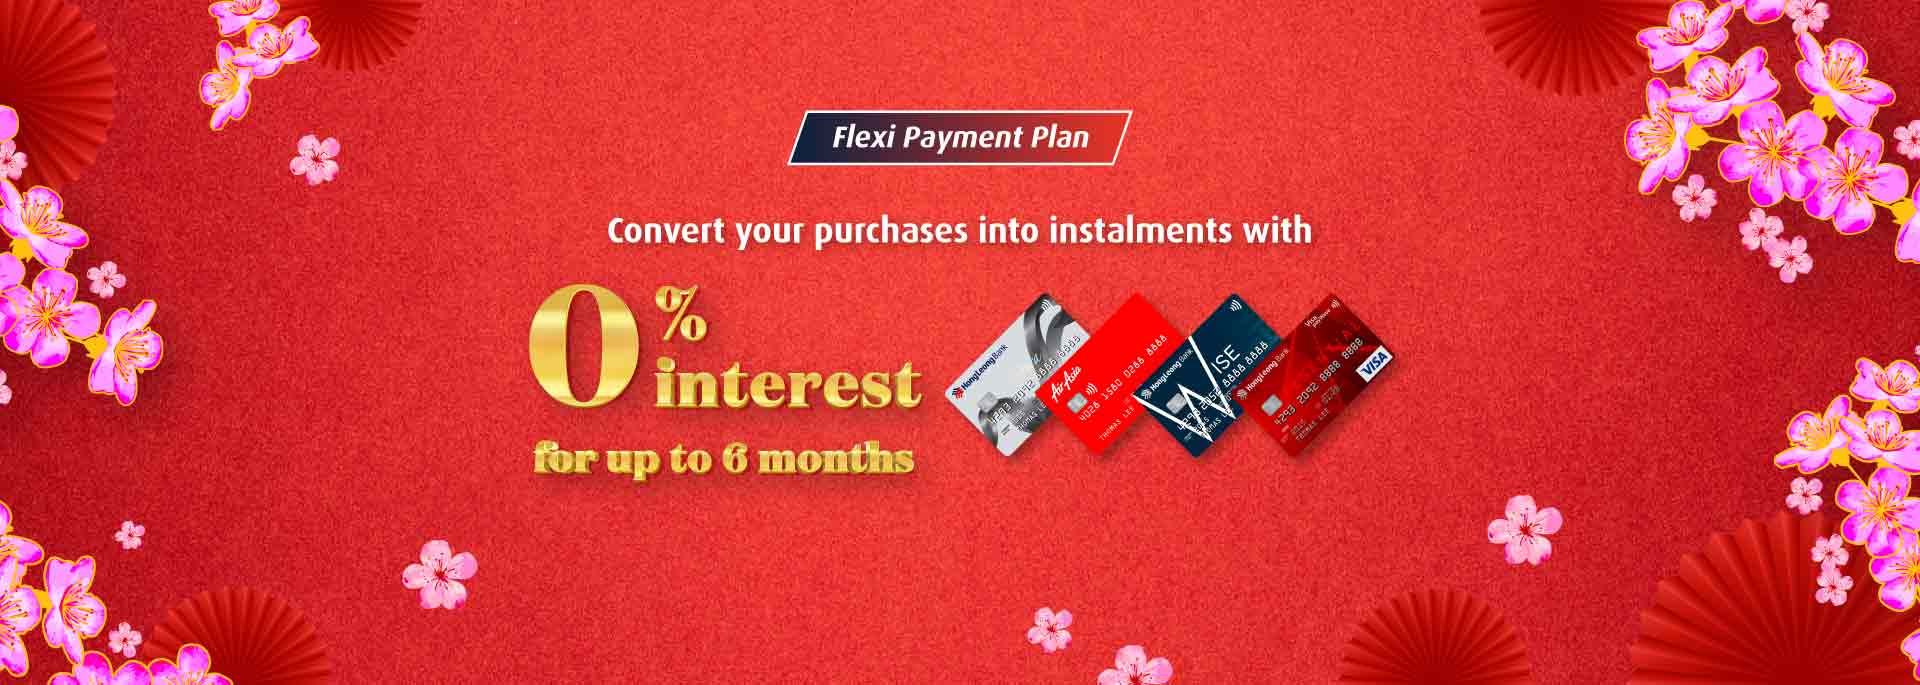 Apply for HLB Flexi Payment Pay (FPP) today and enjoy this exclusive CNY offer